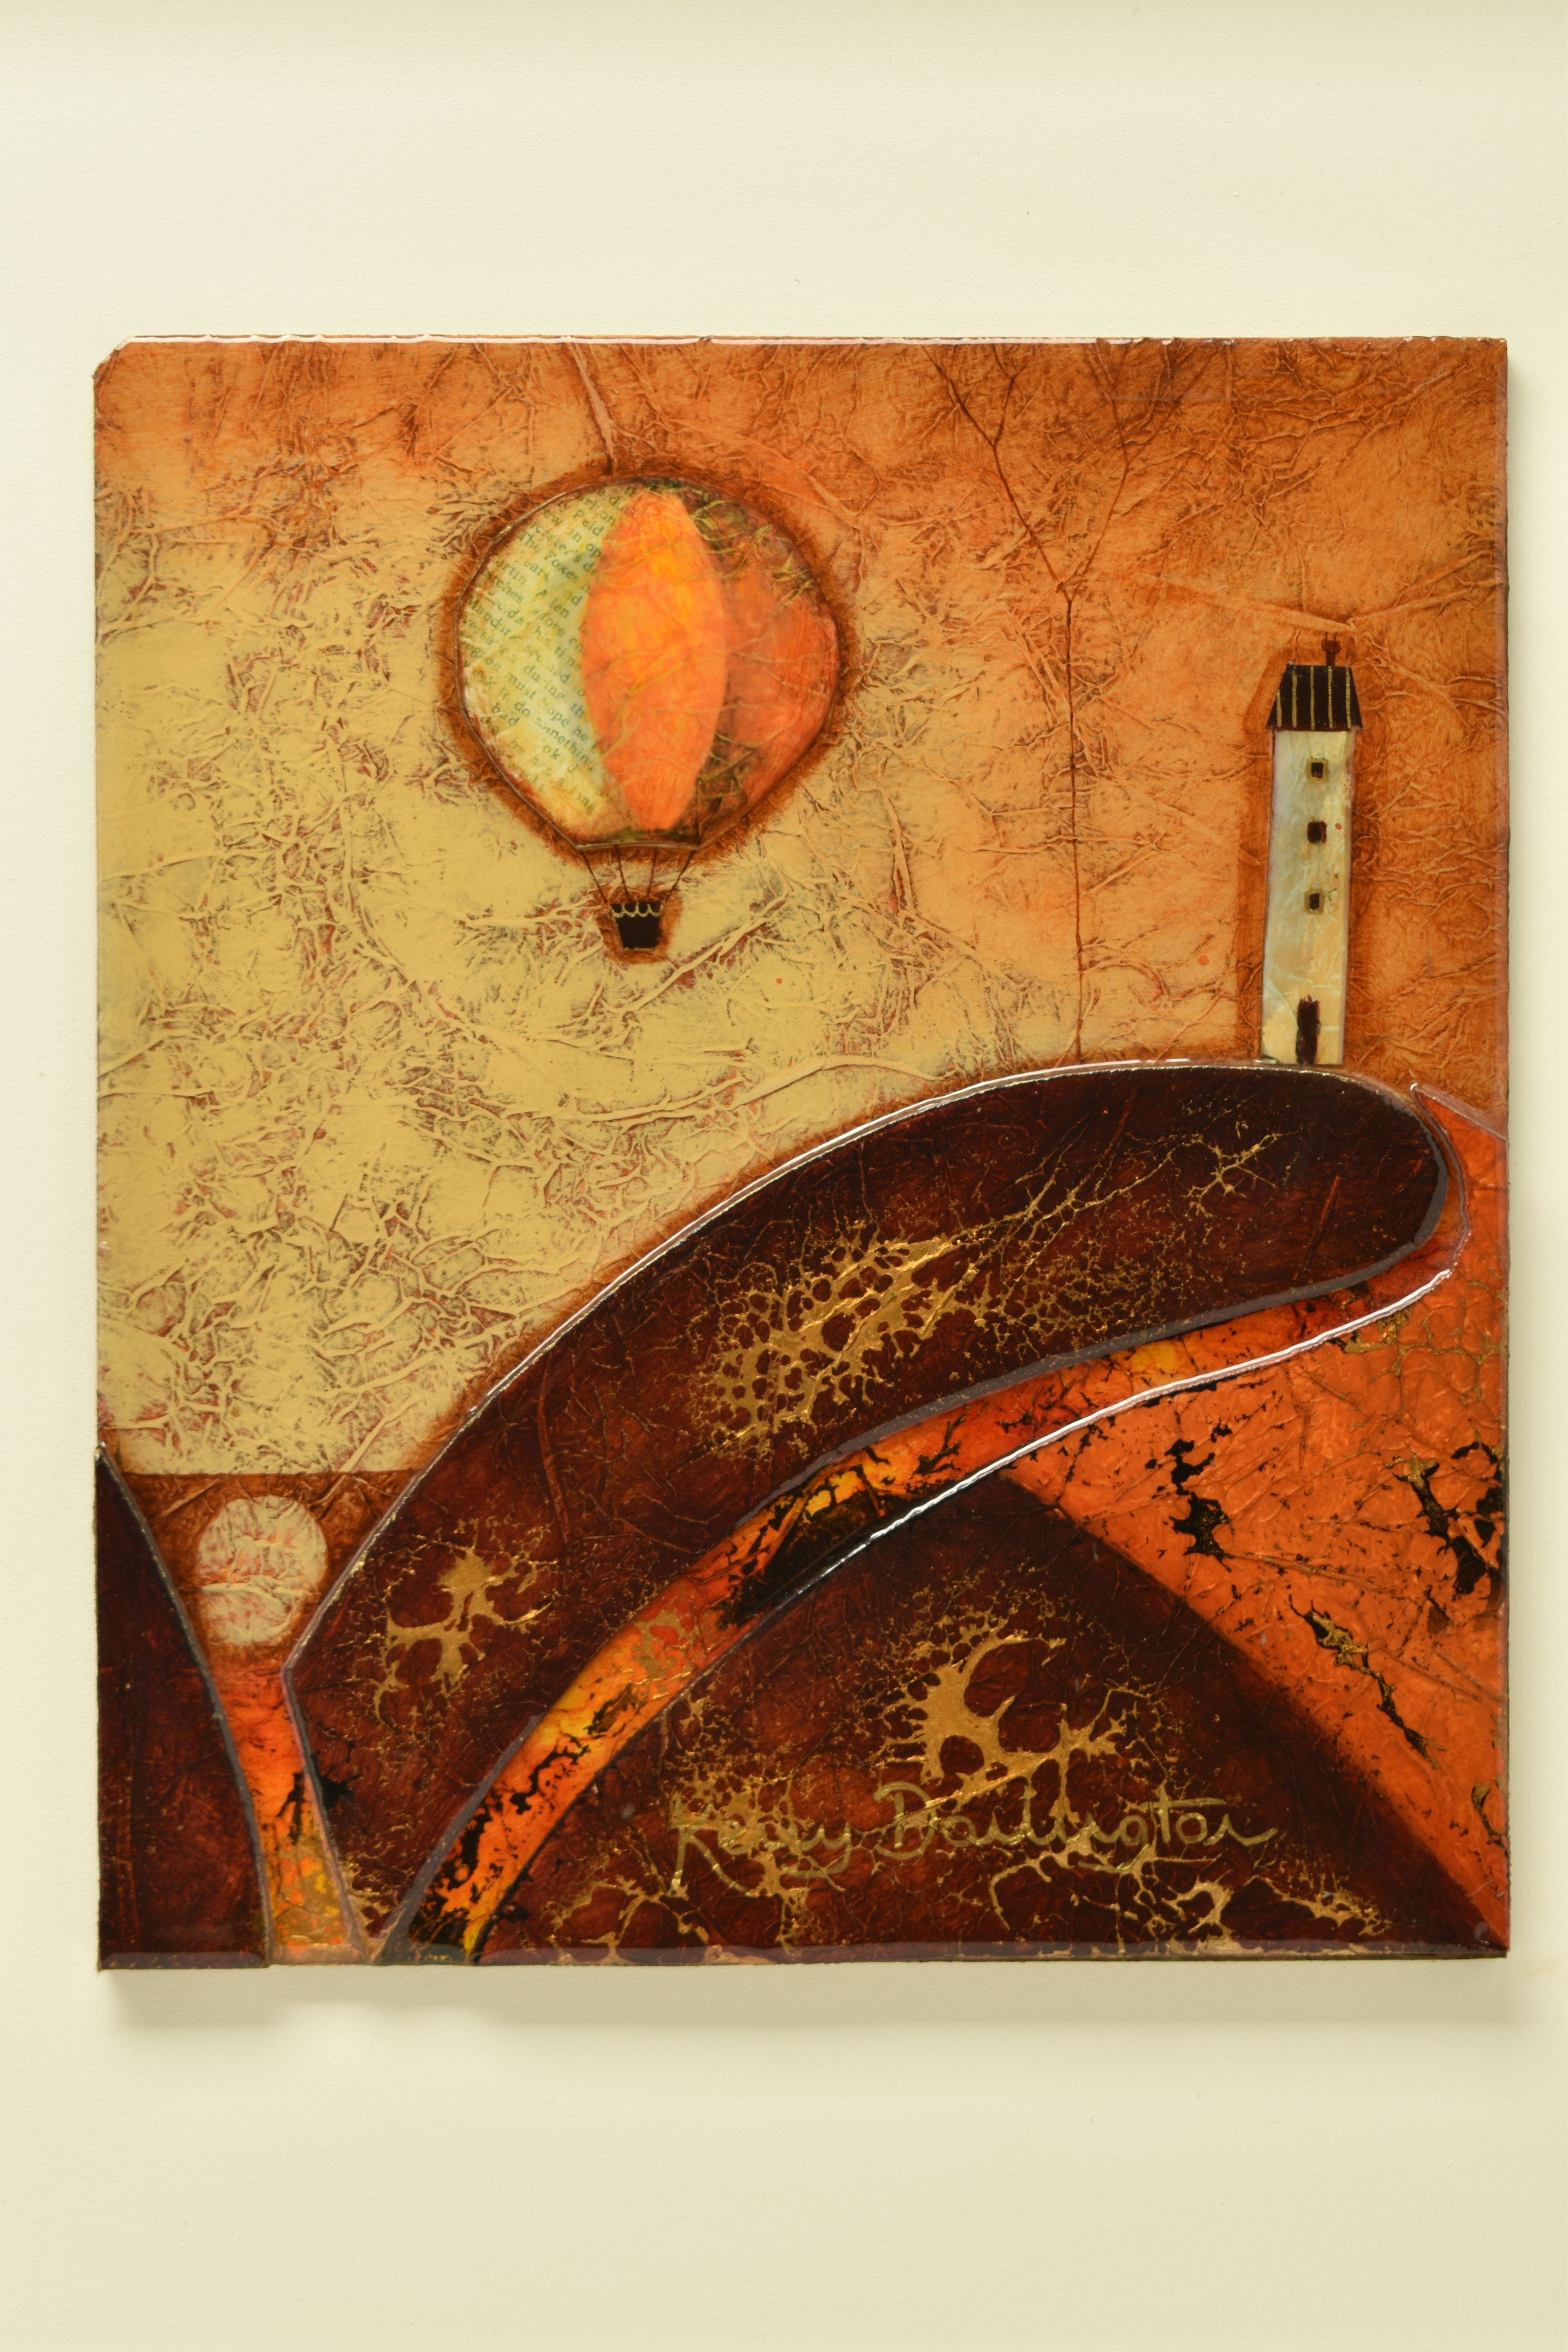 KERRY DARLINGTON (WALES 1974) A TRIPTYCH FANTASY LANDSCAPE, three hot air balloons are flying - Image 6 of 18